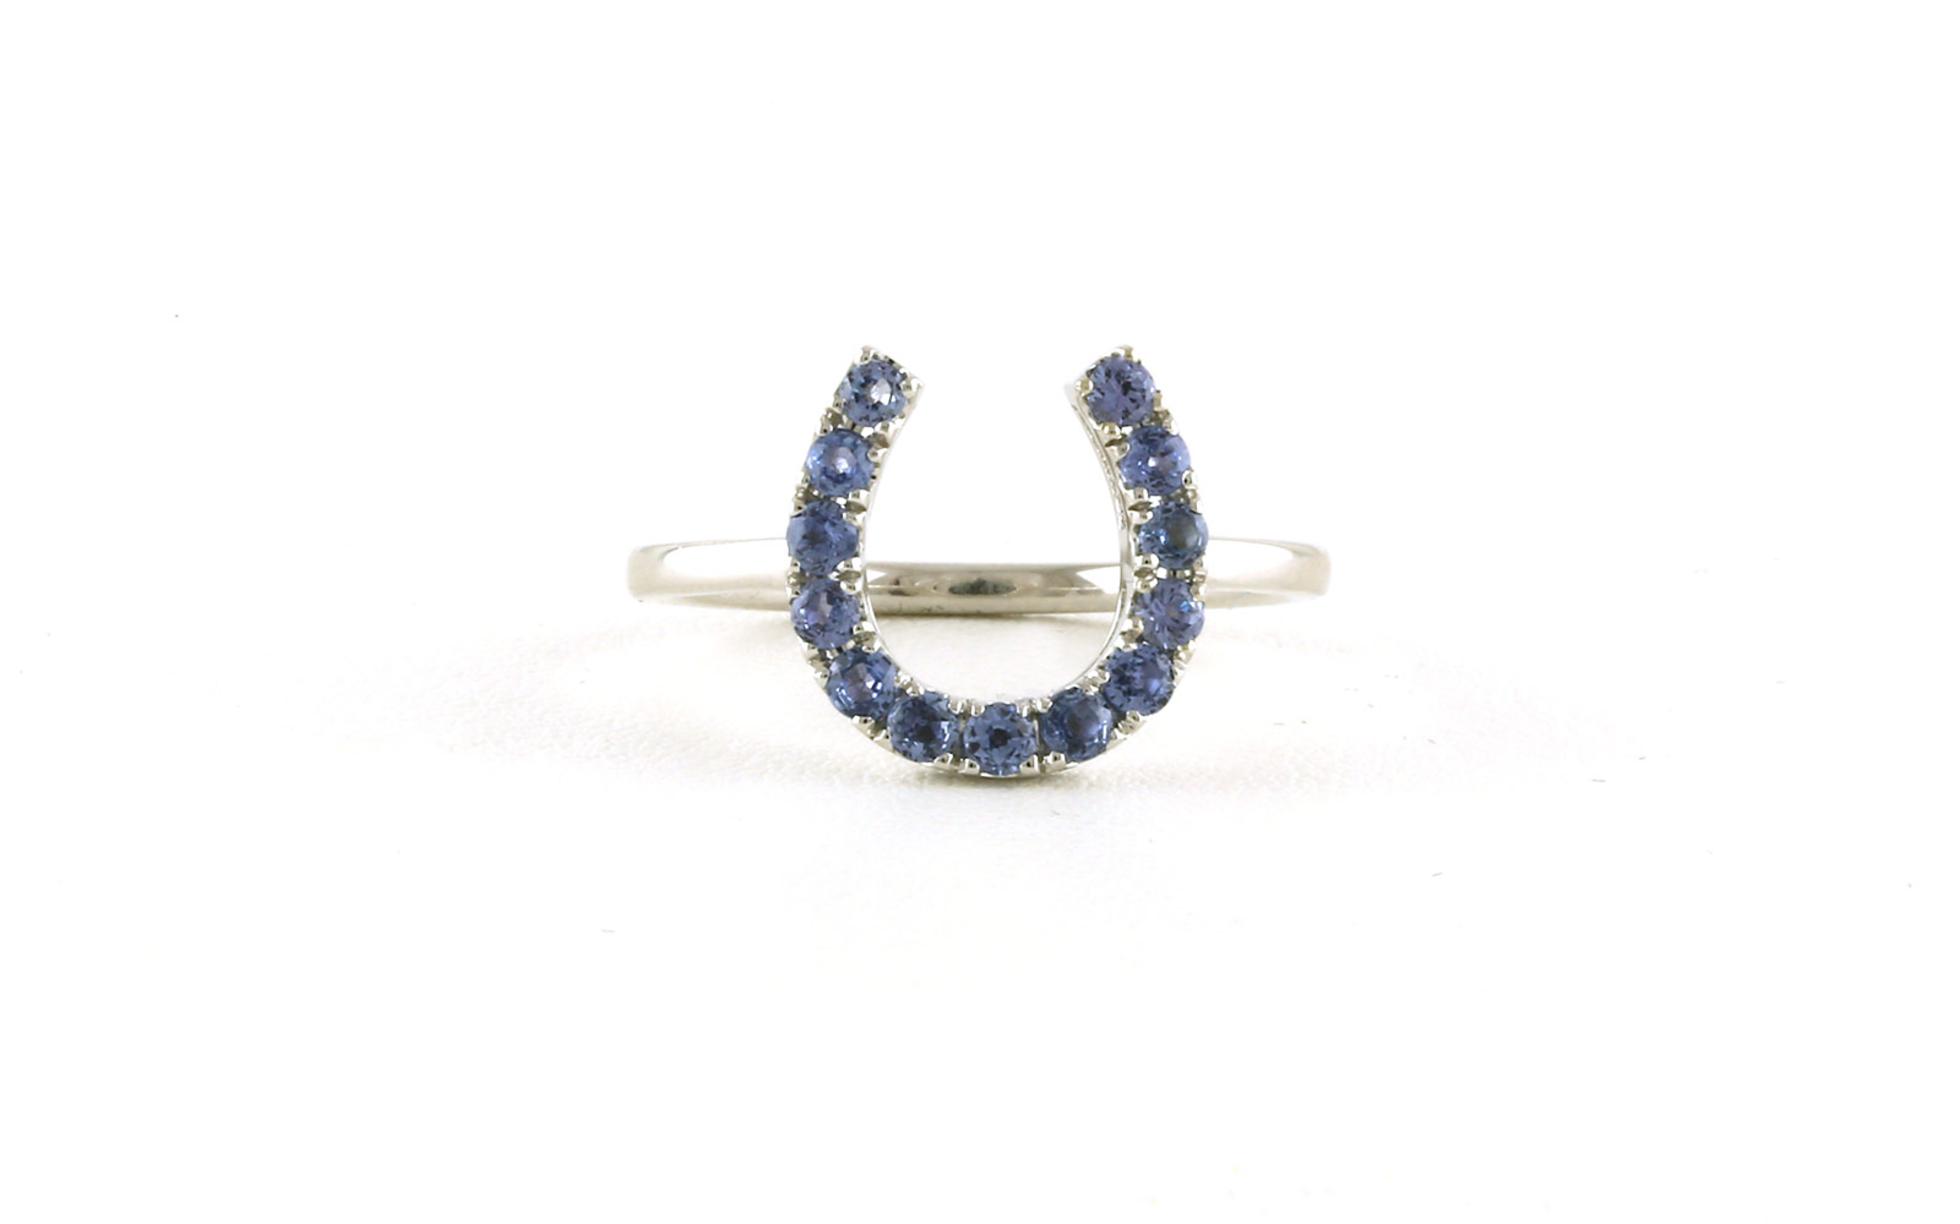 Horseshoe-style Montana Yogo Sapphire Ring in White Gold (0.52cts TWT)